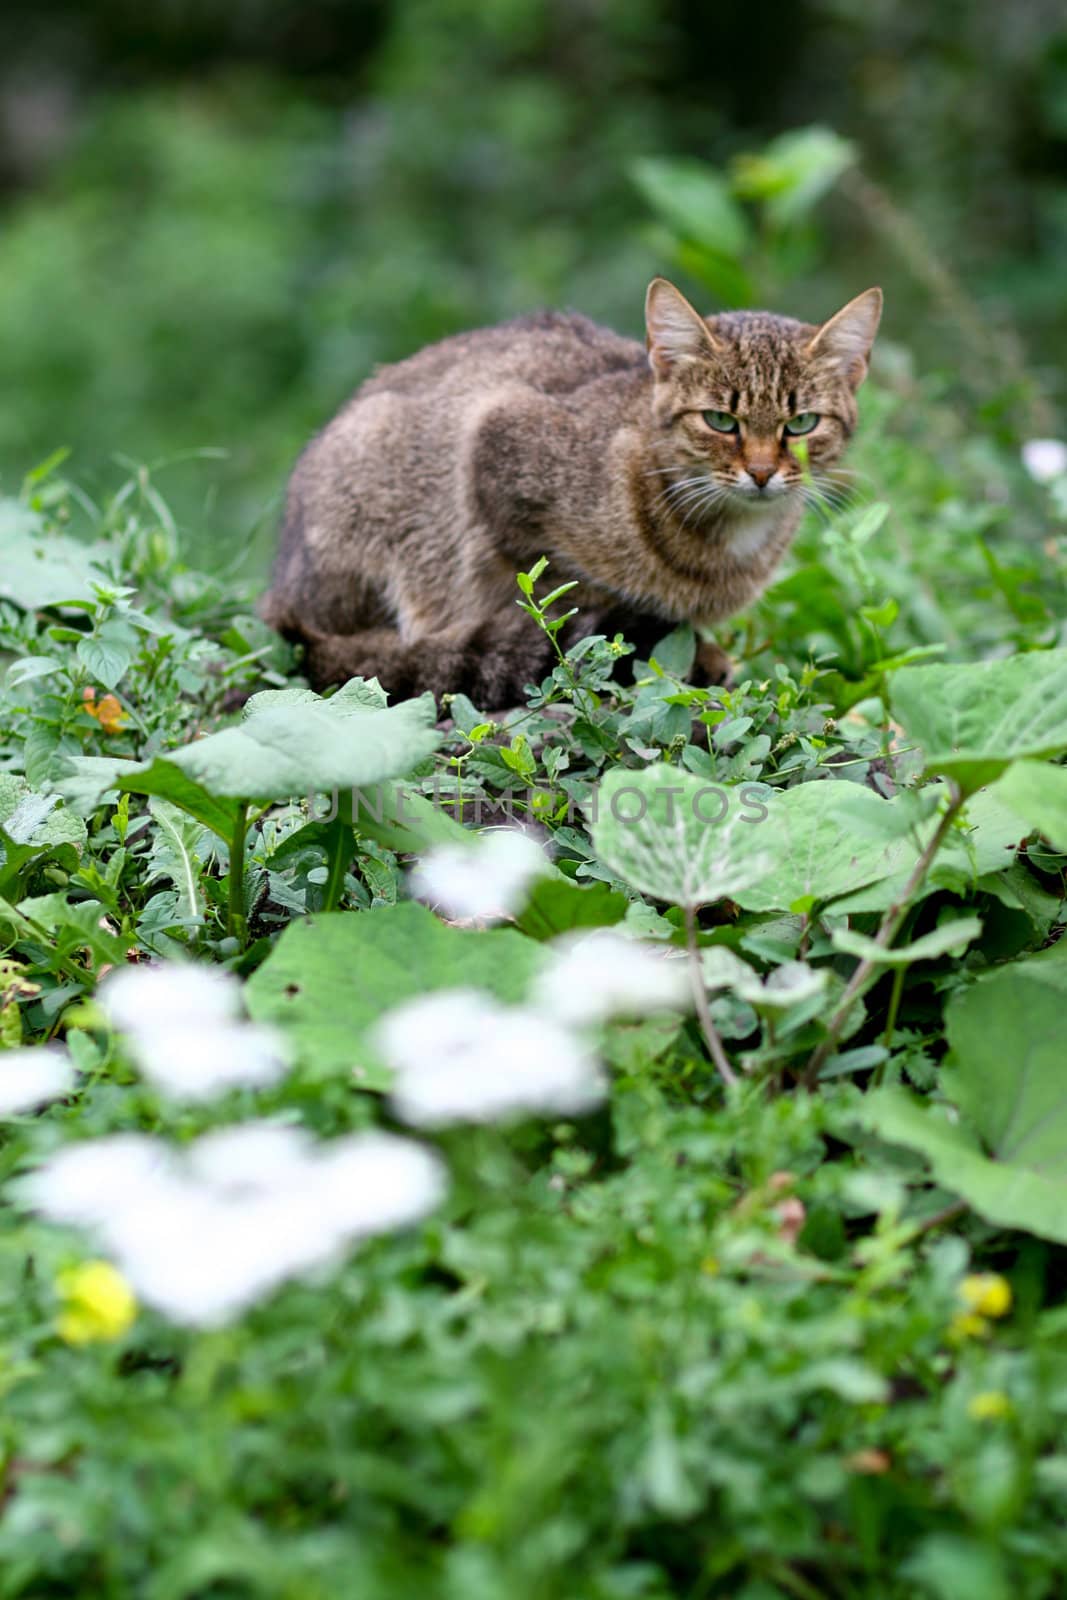 An image of a cat on green grass